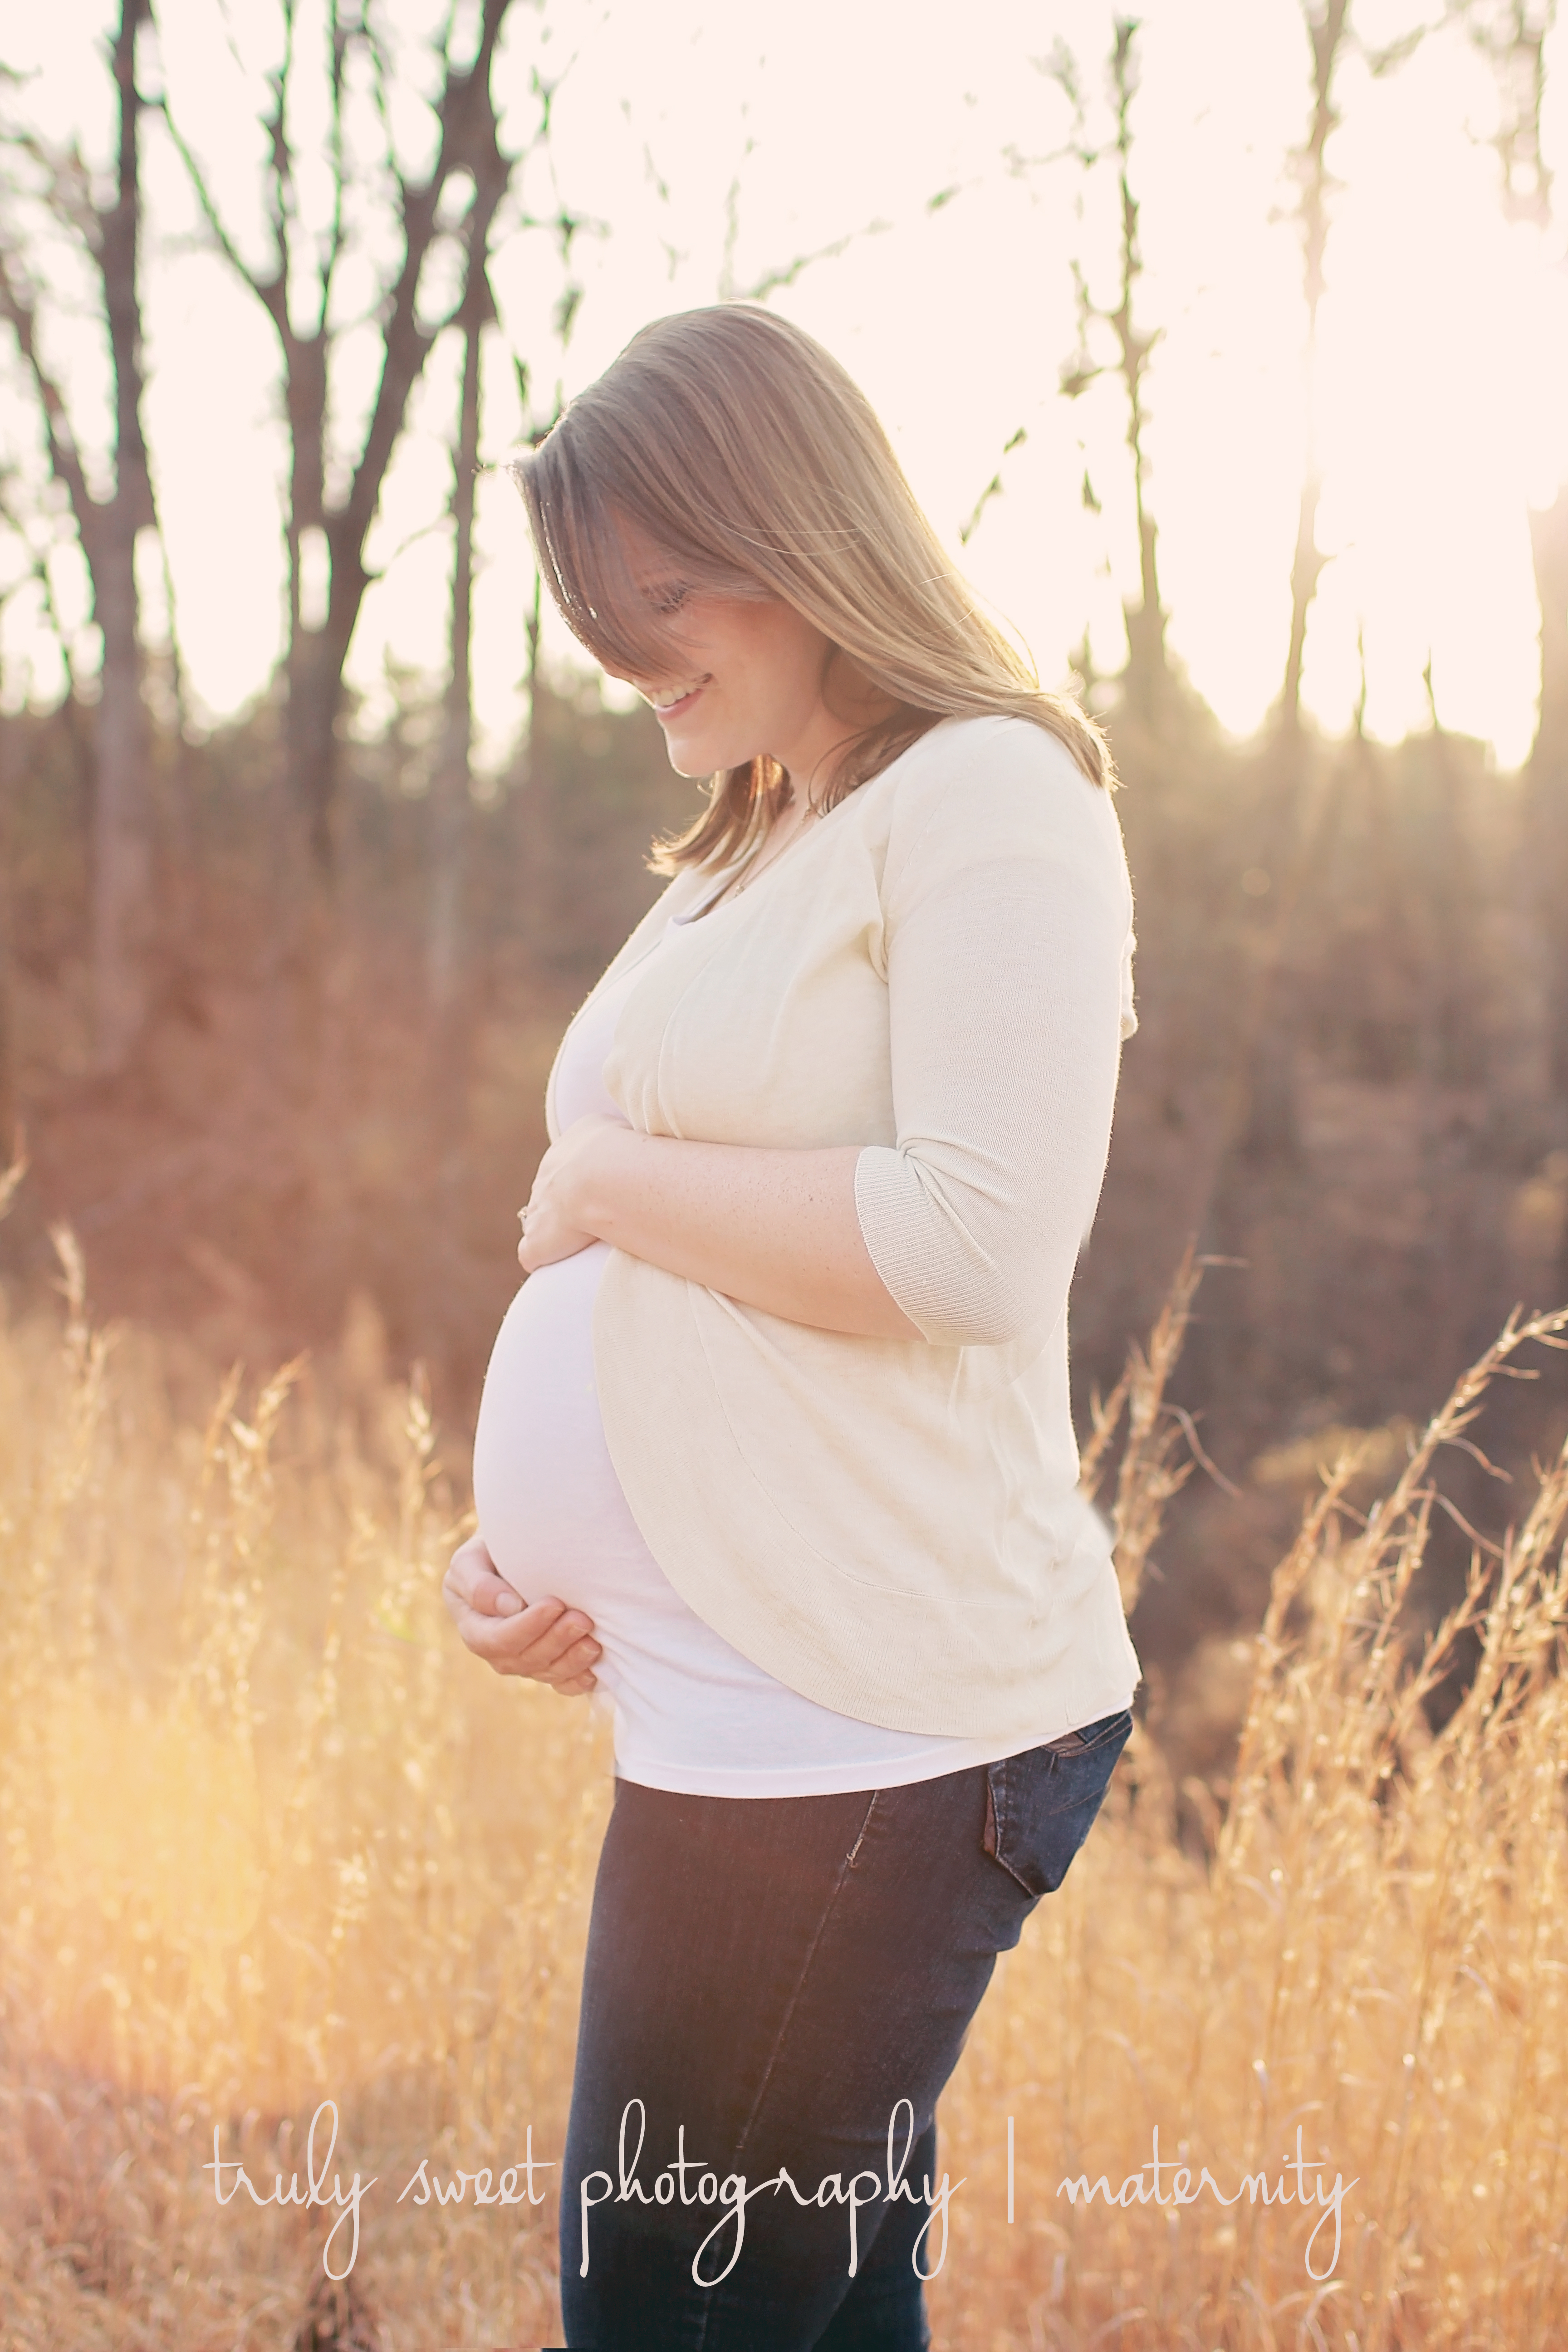 Gorgeous Pregnancy Photographer | Truly Sweet Photography